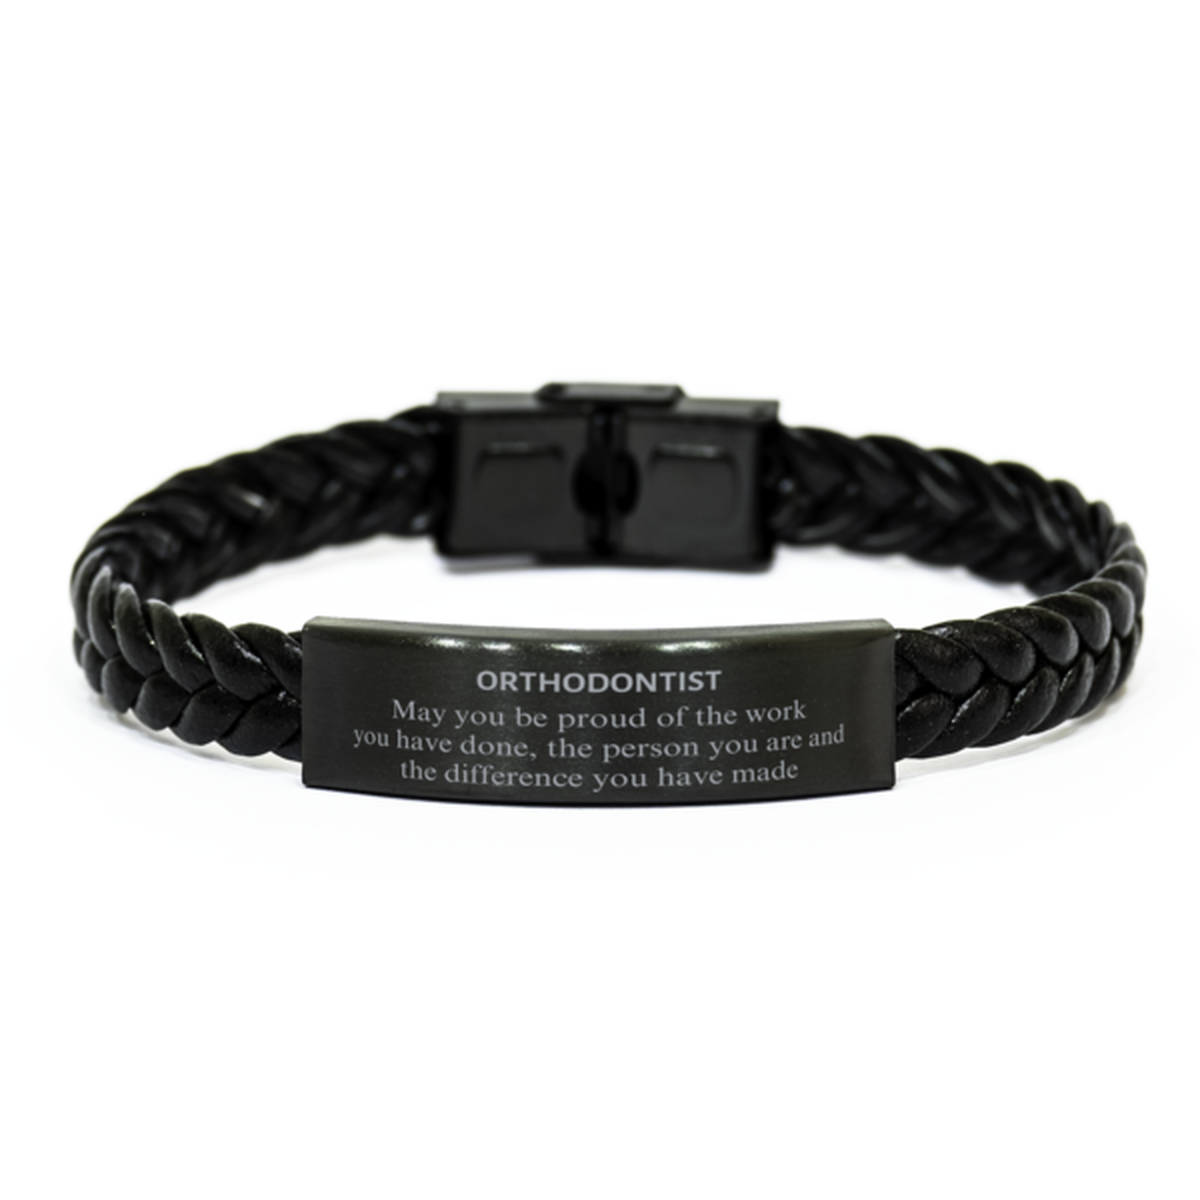 Orthodontist May you be proud of the work you have done, Retirement Orthodontist Braided Leather Bracelet for Colleague Appreciation Gifts Amazing for Orthodontist